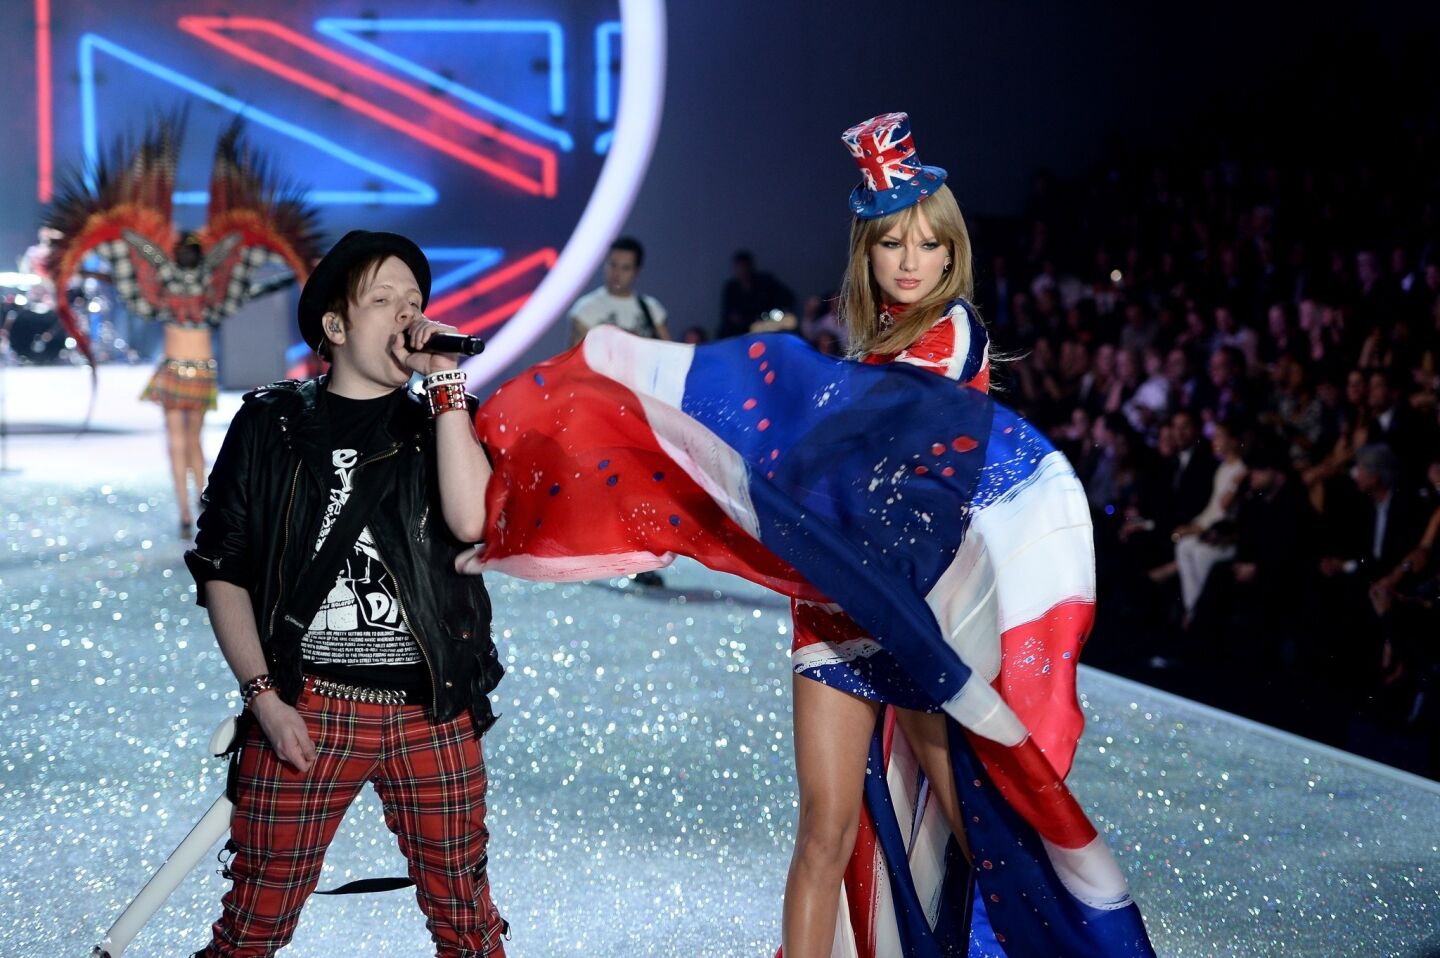 Singers Patrick Stump of the band Fall Out Boy and Taylor Swift perform at the 2013 Victoria's Secret Fashion Show at Lexington Avenue Armory on Wednesday in New York City.